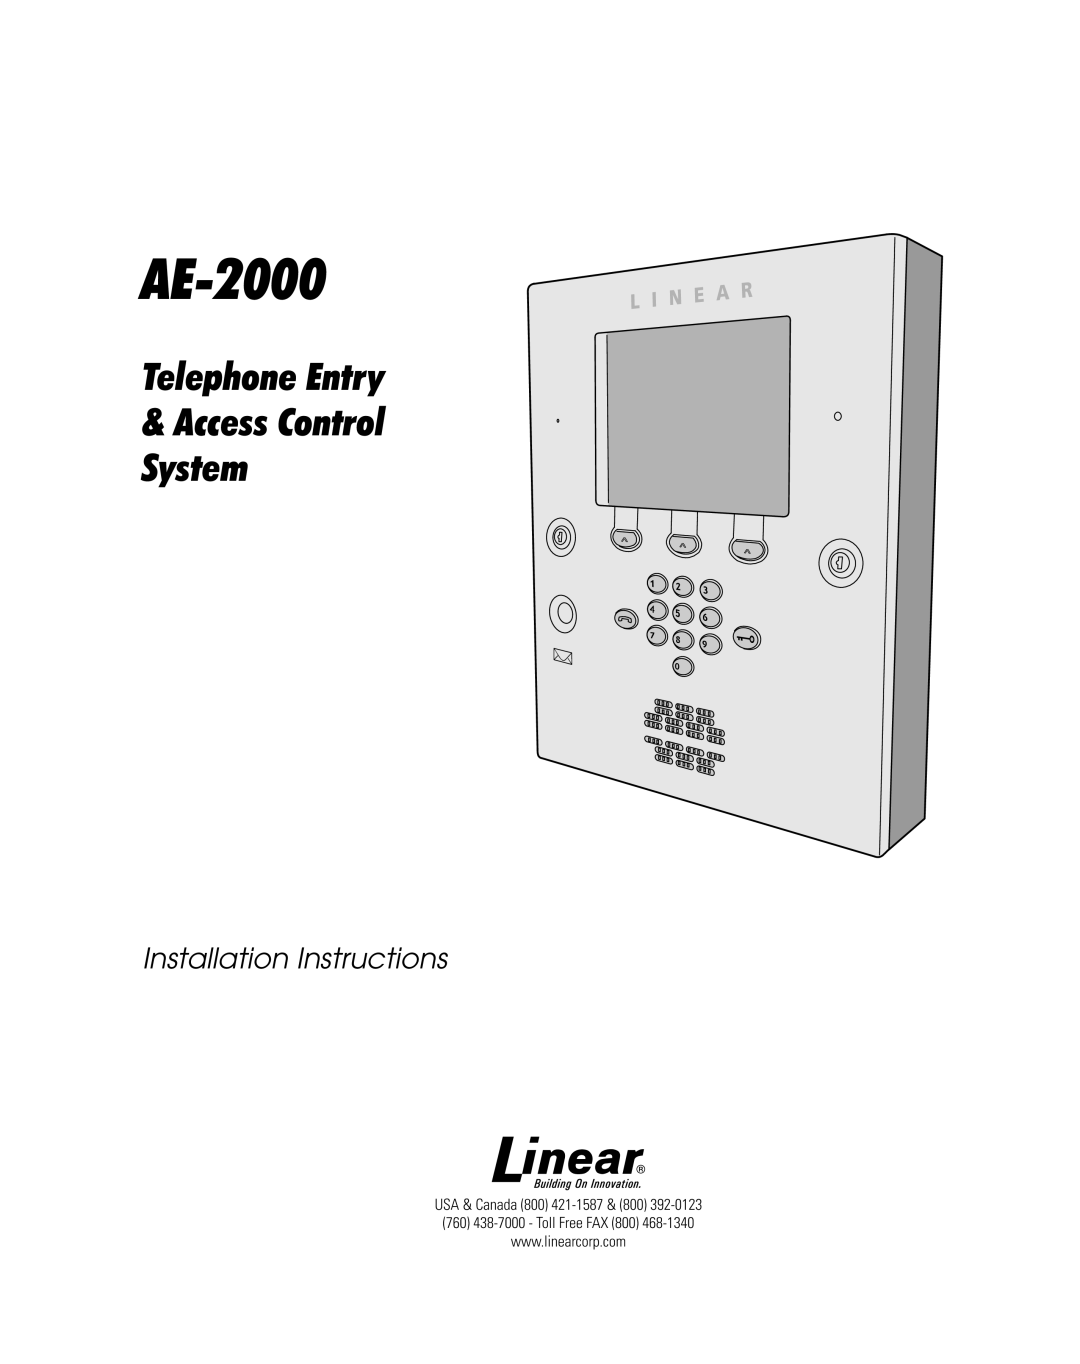 Linear AE-2000 installation instructions Telephone Entry & Access Control System, Installation Instructions 